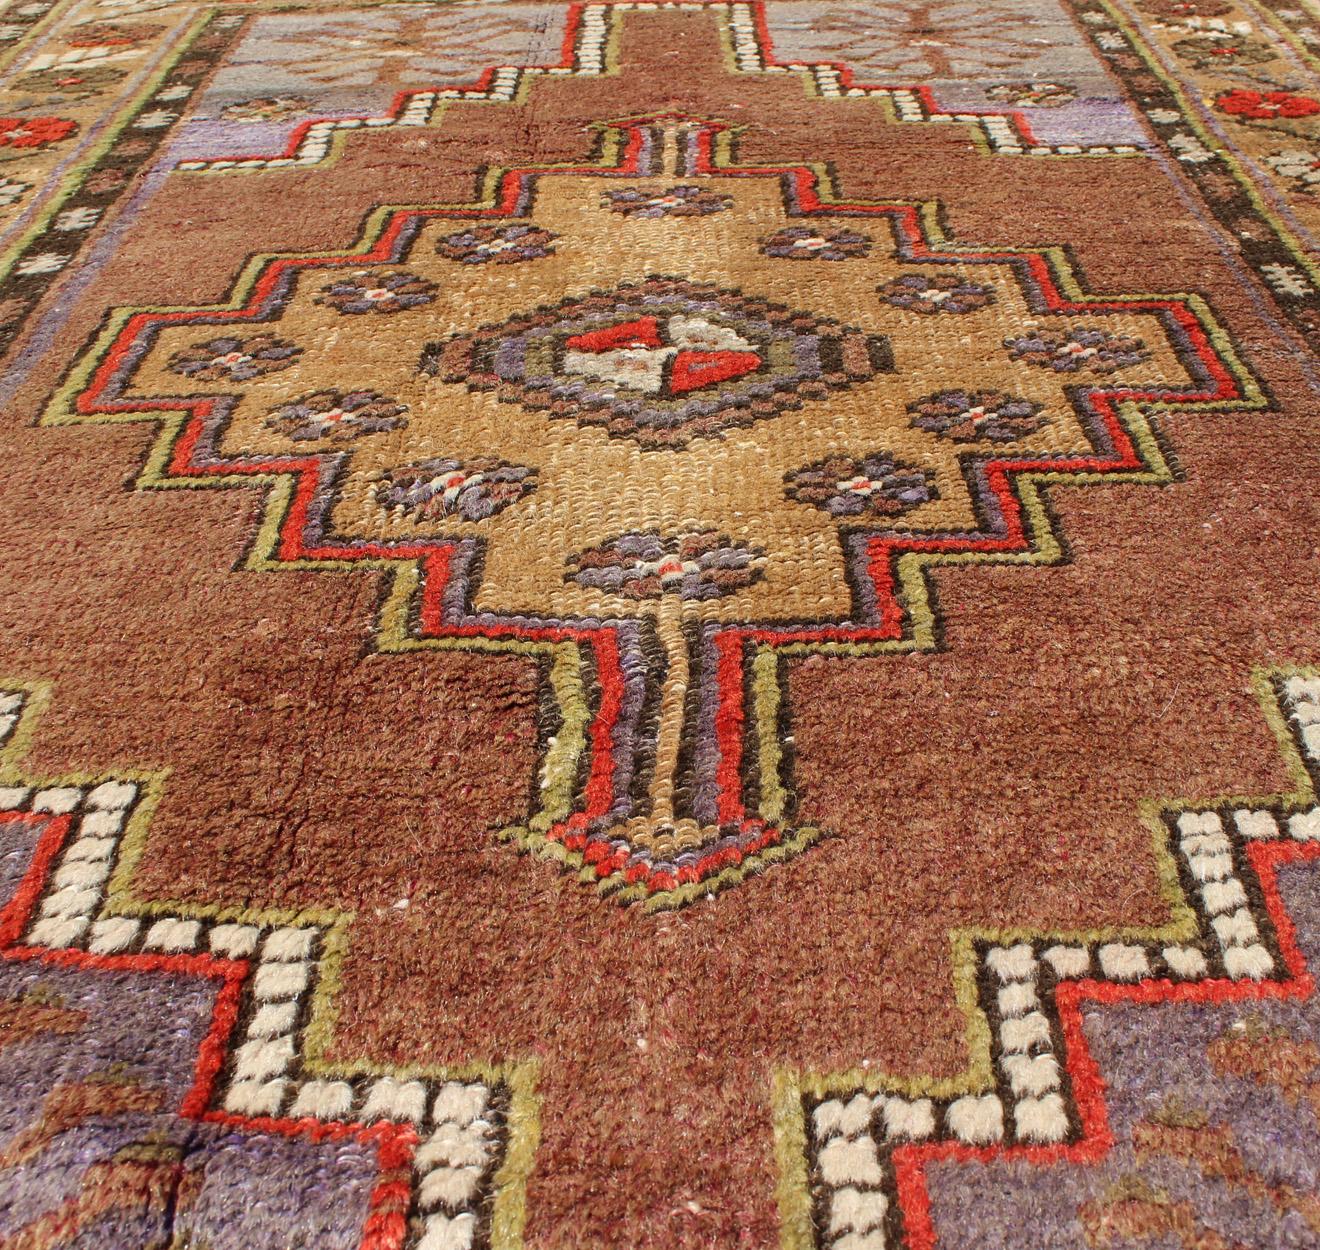 Colorful vintage Turkish oushak with Geometric design.

Vintage Turkish rug in green, soft yellow, pale purple, ivory, red, tan & taupe, keivan woven arts / rug EN-176061, country of origin / type: Turkey / oushak, circa 1940.

Measures: 3'2 x